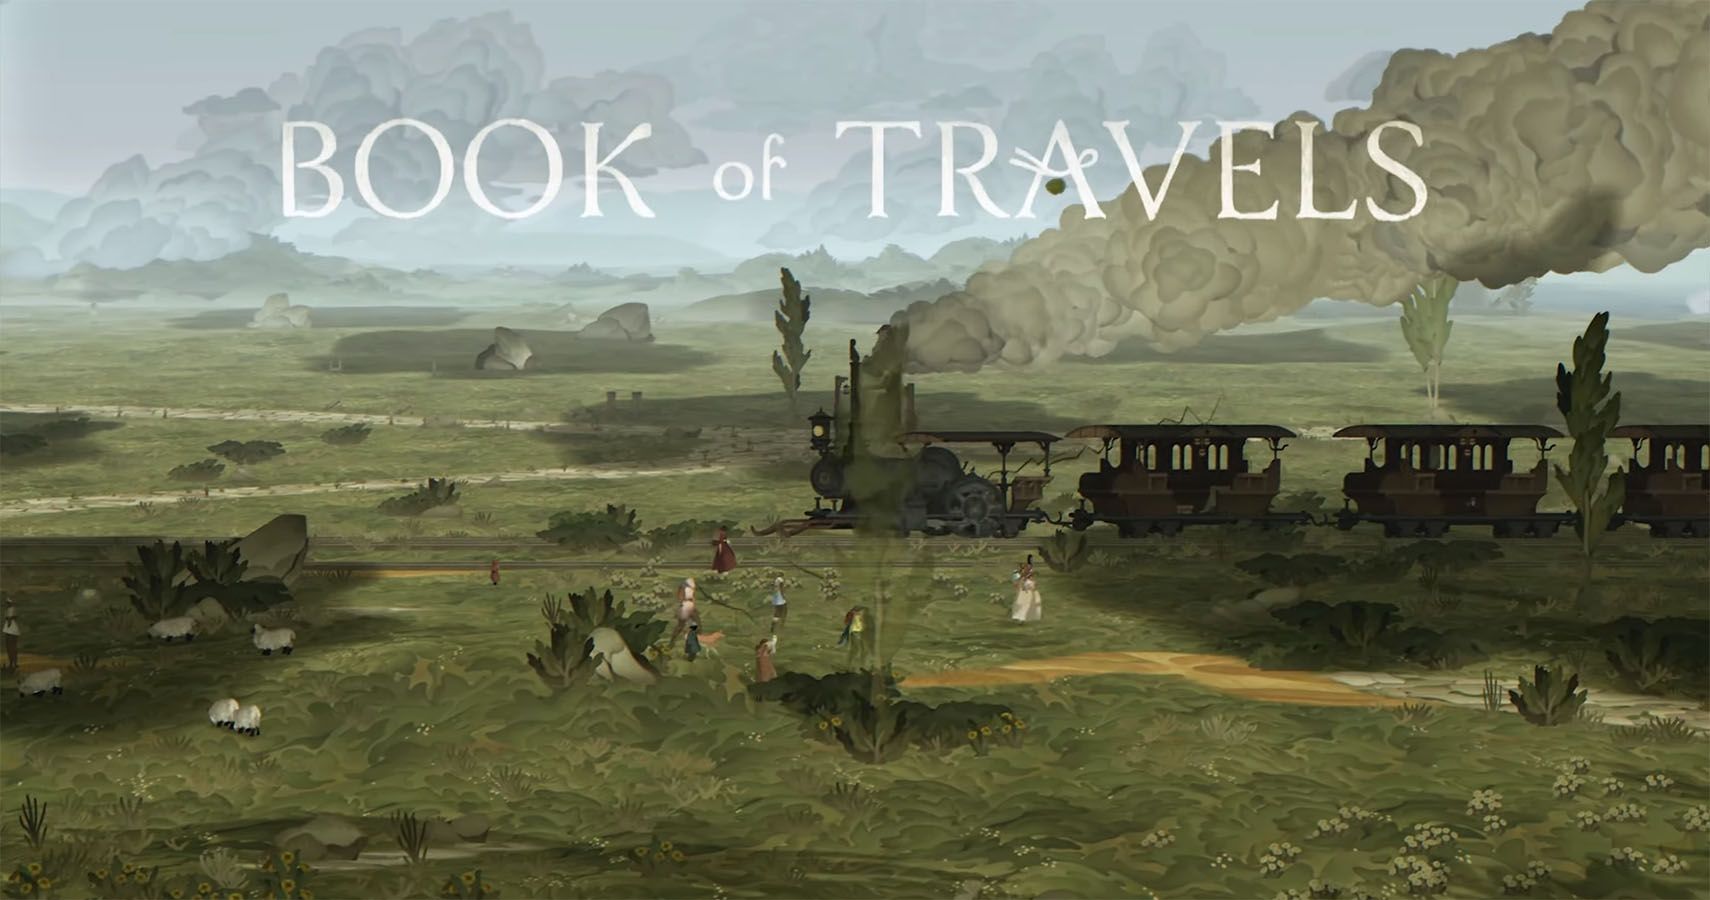 A screen grab of the Book of Travels trailer video